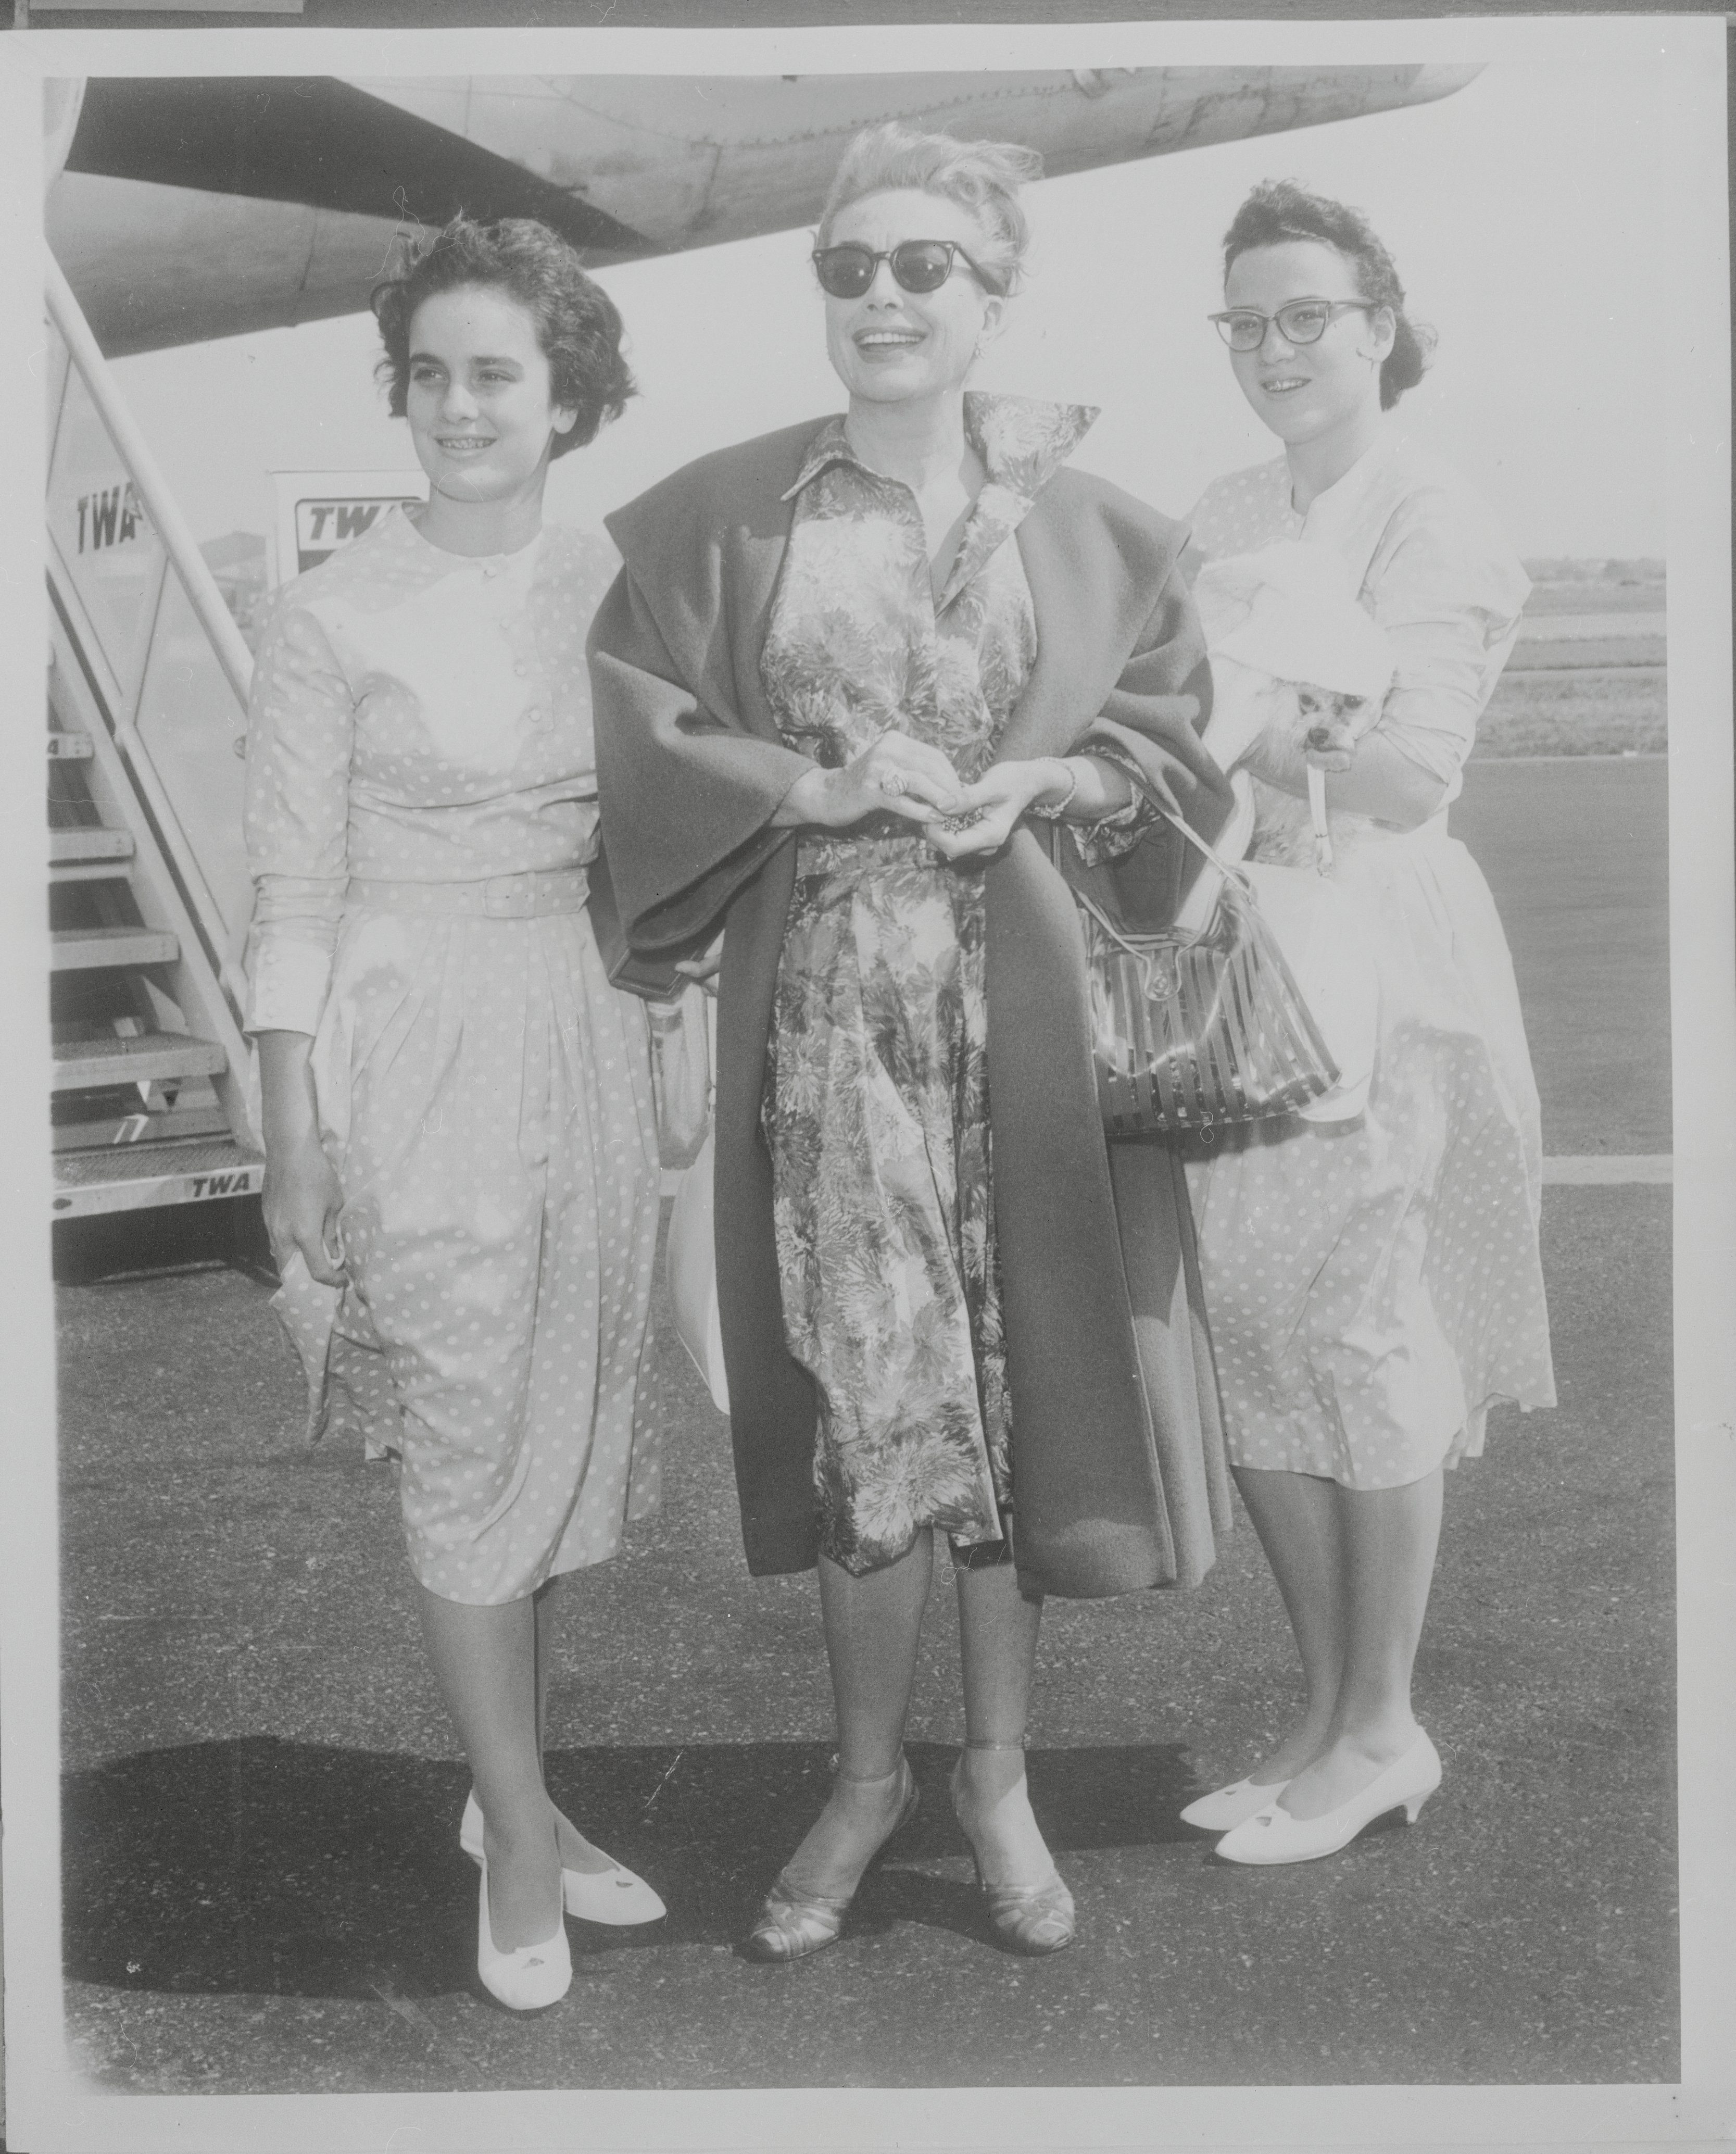 Joan Crawford pictured with her 13-year-old daughters Cathy and Cindy at Idlewild Airport. / Source: Getty Images